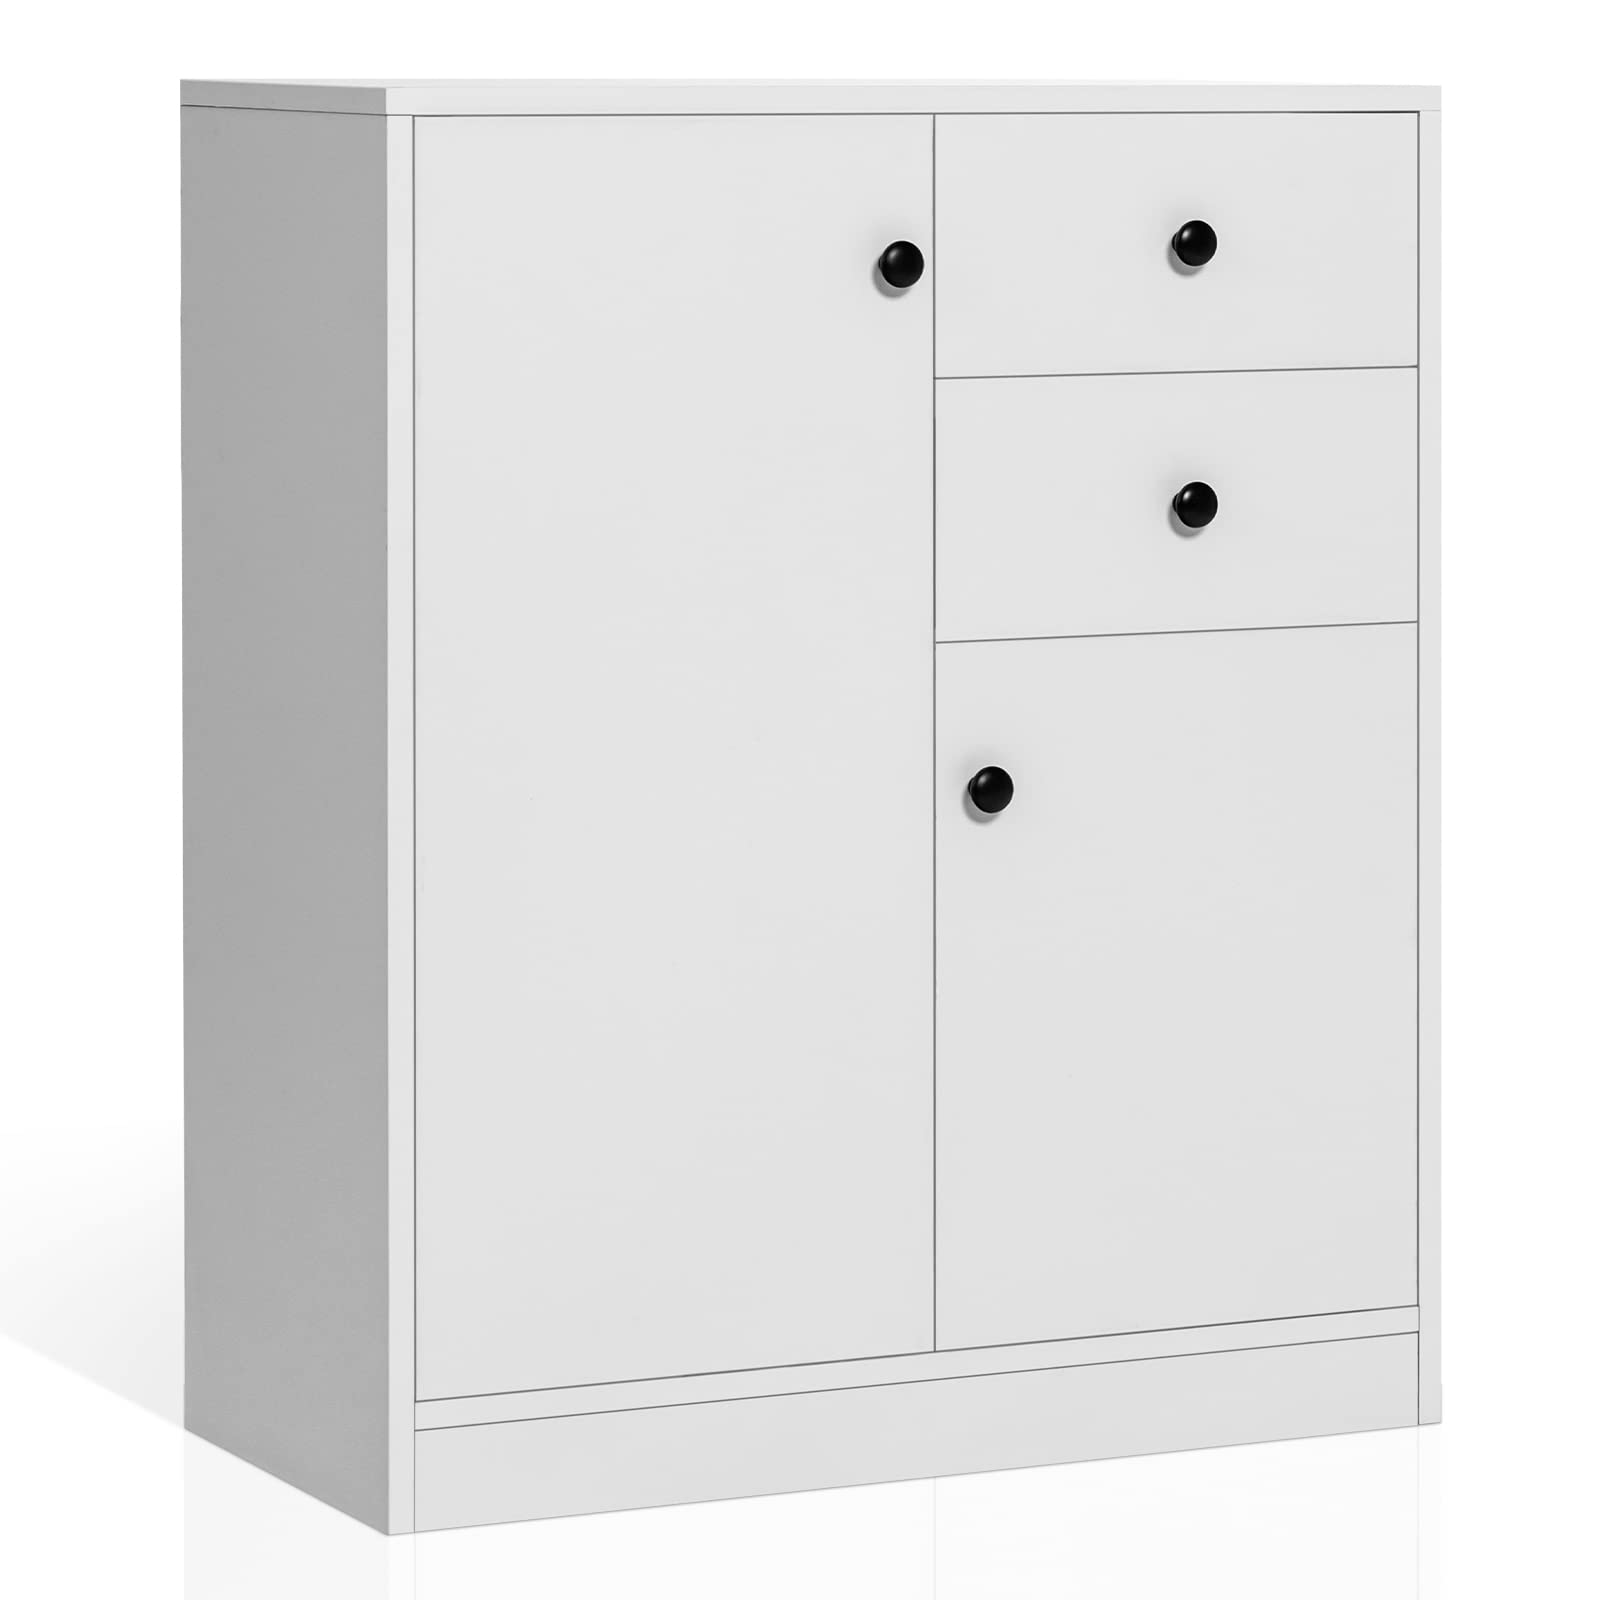 Giantex Floor Storage Base Cabinet - Freestanding Cabinet with Adjustable Shelves, 2 Drawers and 2 Doors, White